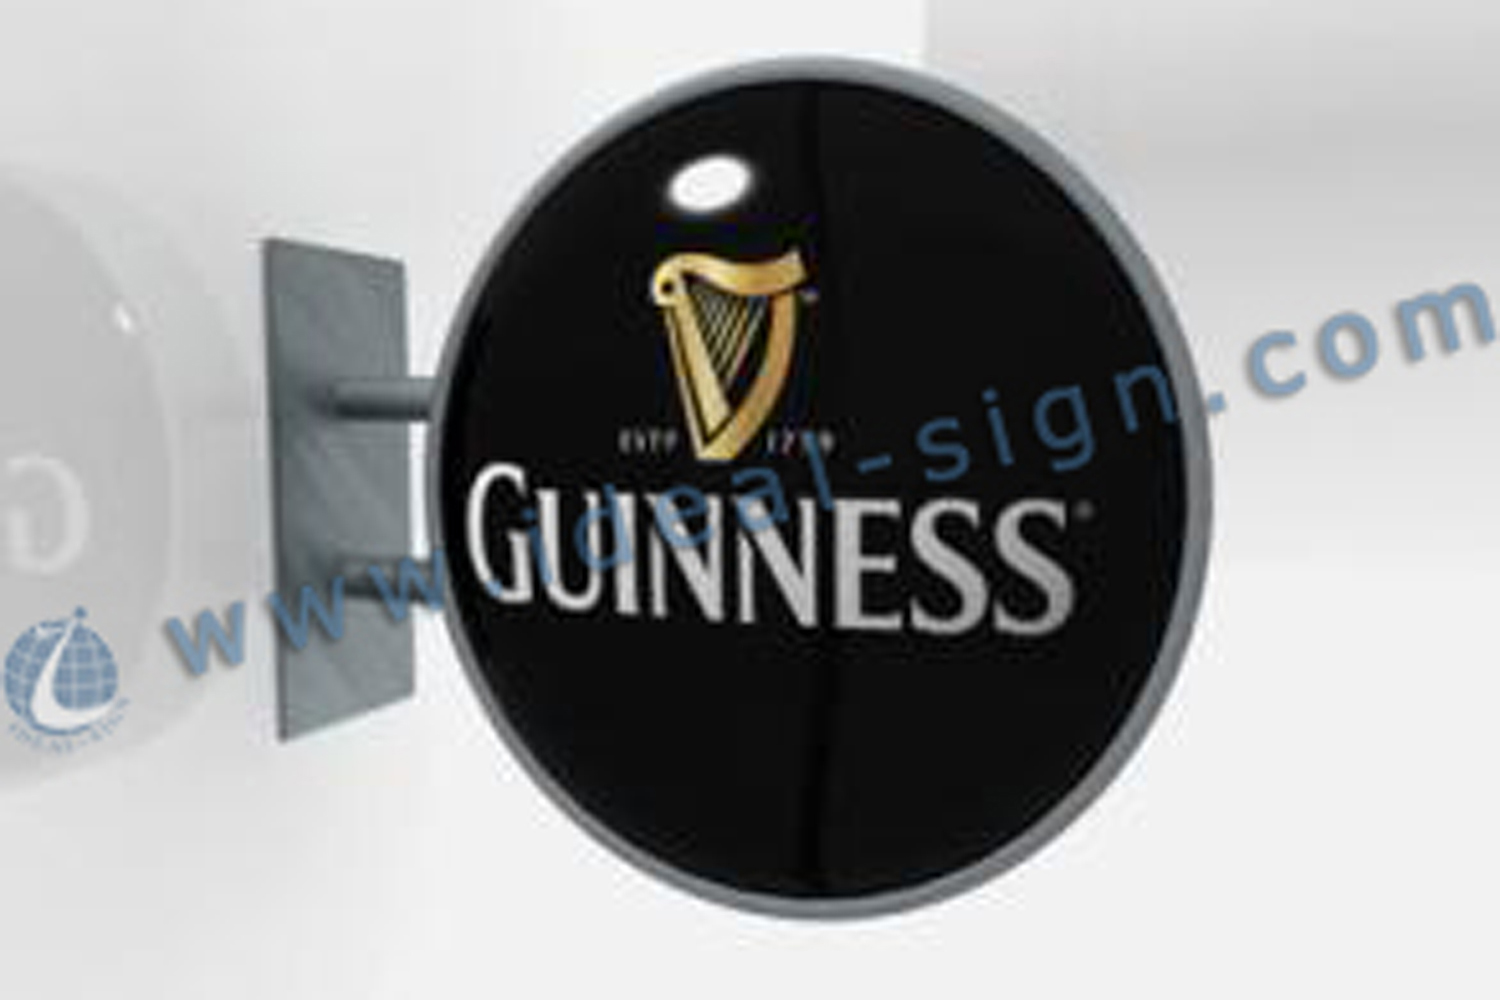 Round Guniness Vacuum Formed Light Box Exterior Wall Mounted Sign